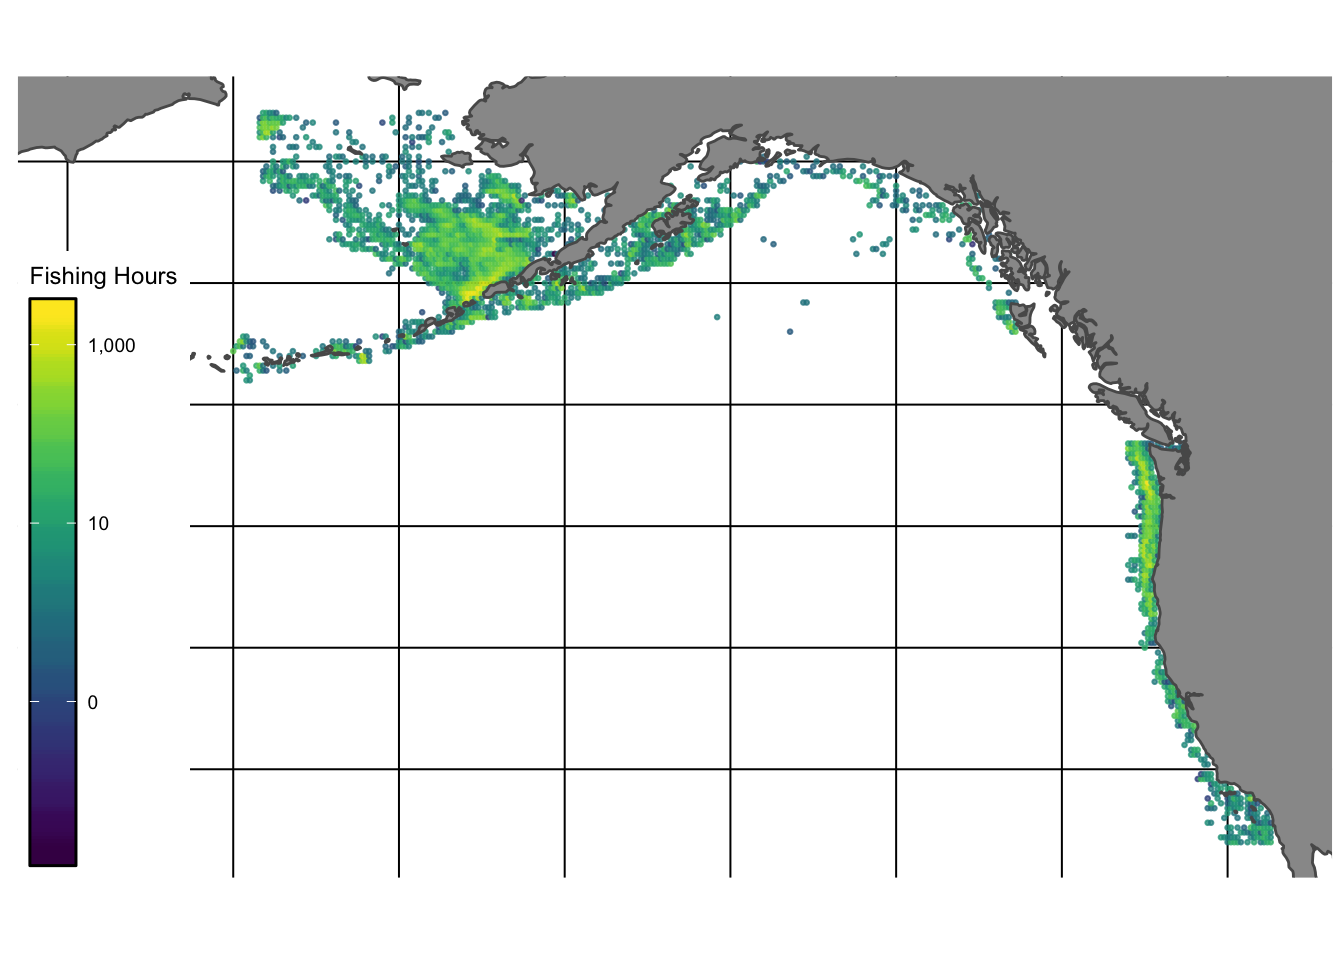 Total hours of fishing activity reported by Global Fishing Watch in the Eastern Bering Sea, Aluetian Islands, and Gulf of Alaska regions